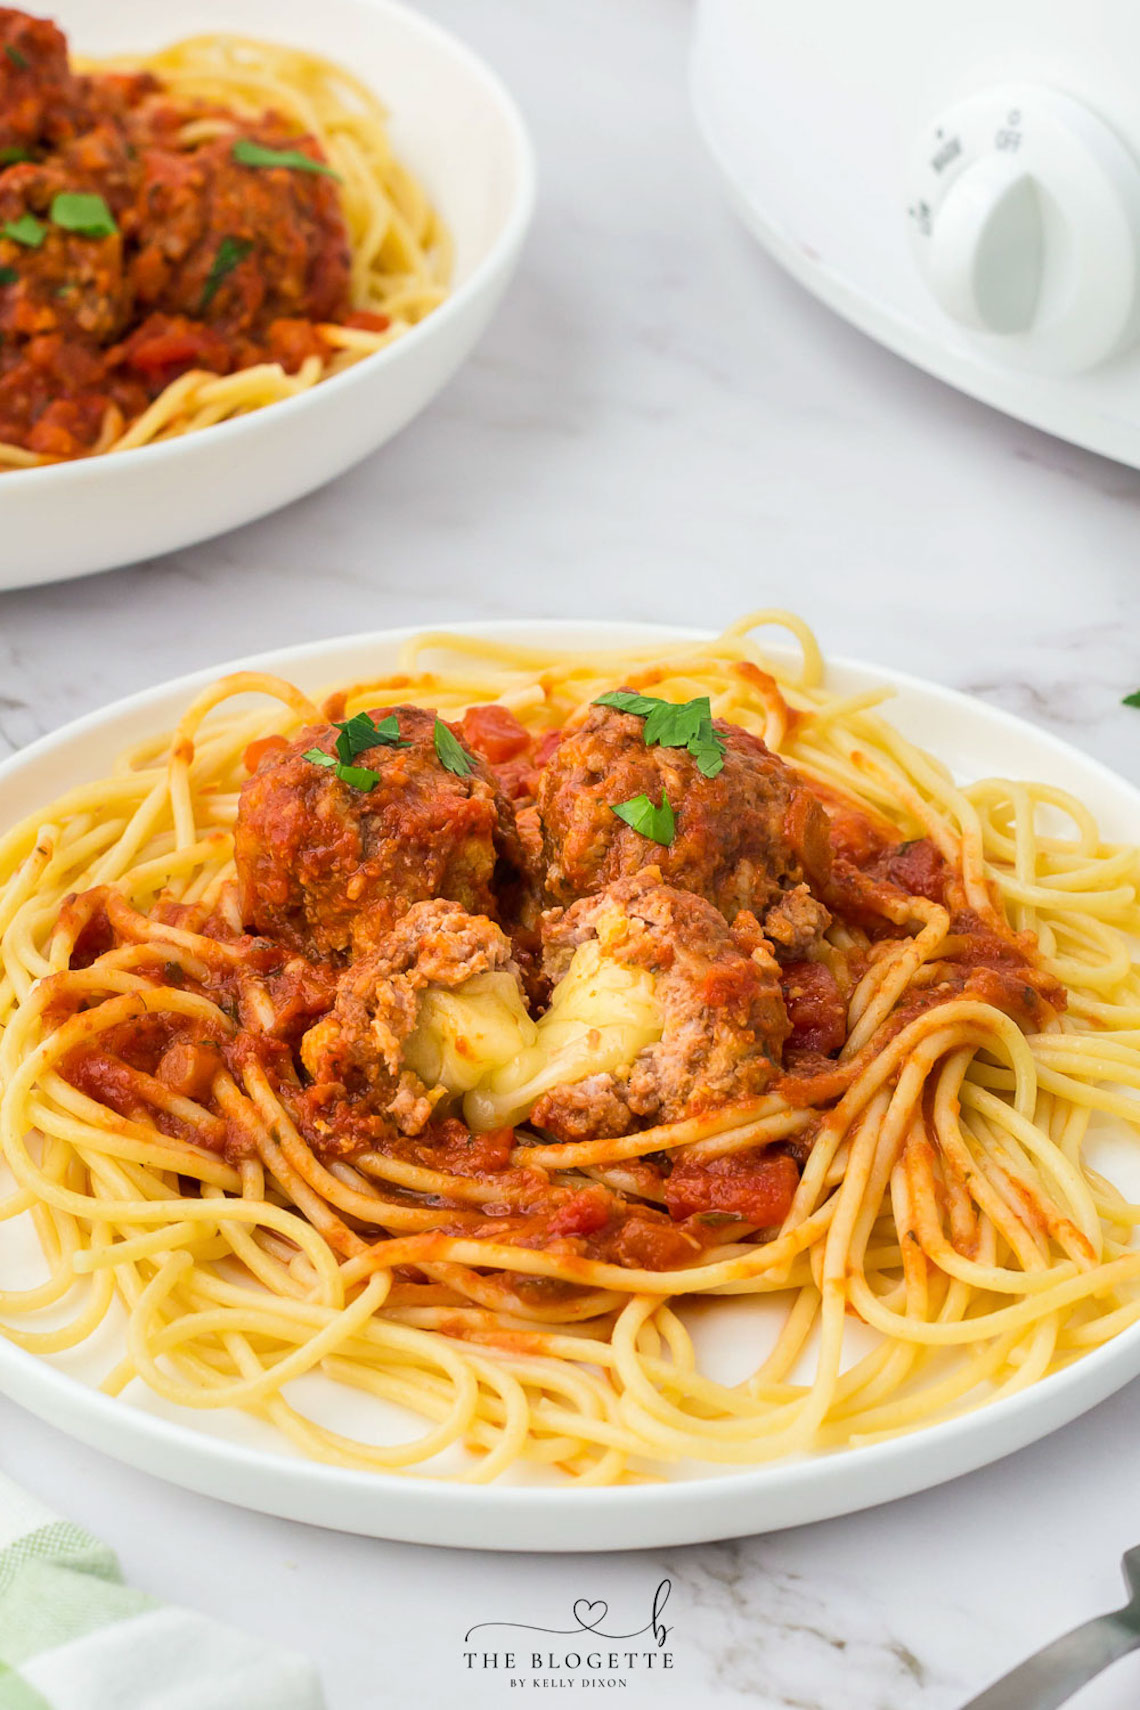 Juicy Crock Pot Cheese Stuffed Meatballs are one way to spice up everyone's favorite pasta. Nothing says home cooking like a good plate of spaghetti with homemade sauce and meatballs.